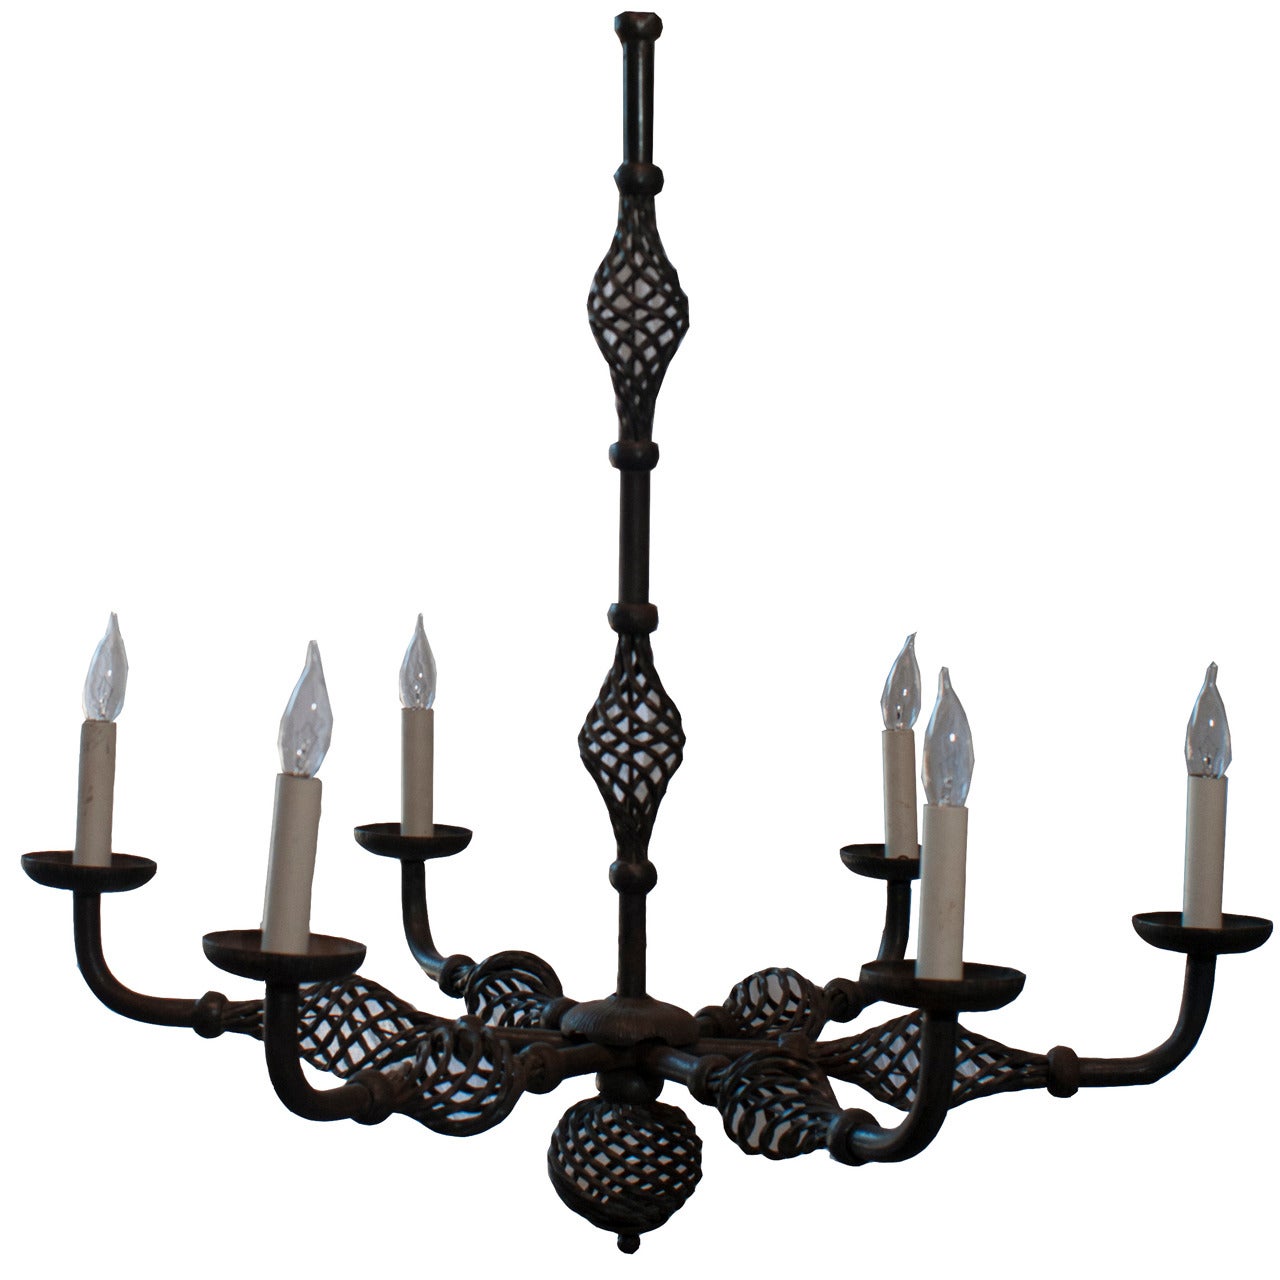 Six Arm Artisanal Wrought Iron Chandelier For Sale